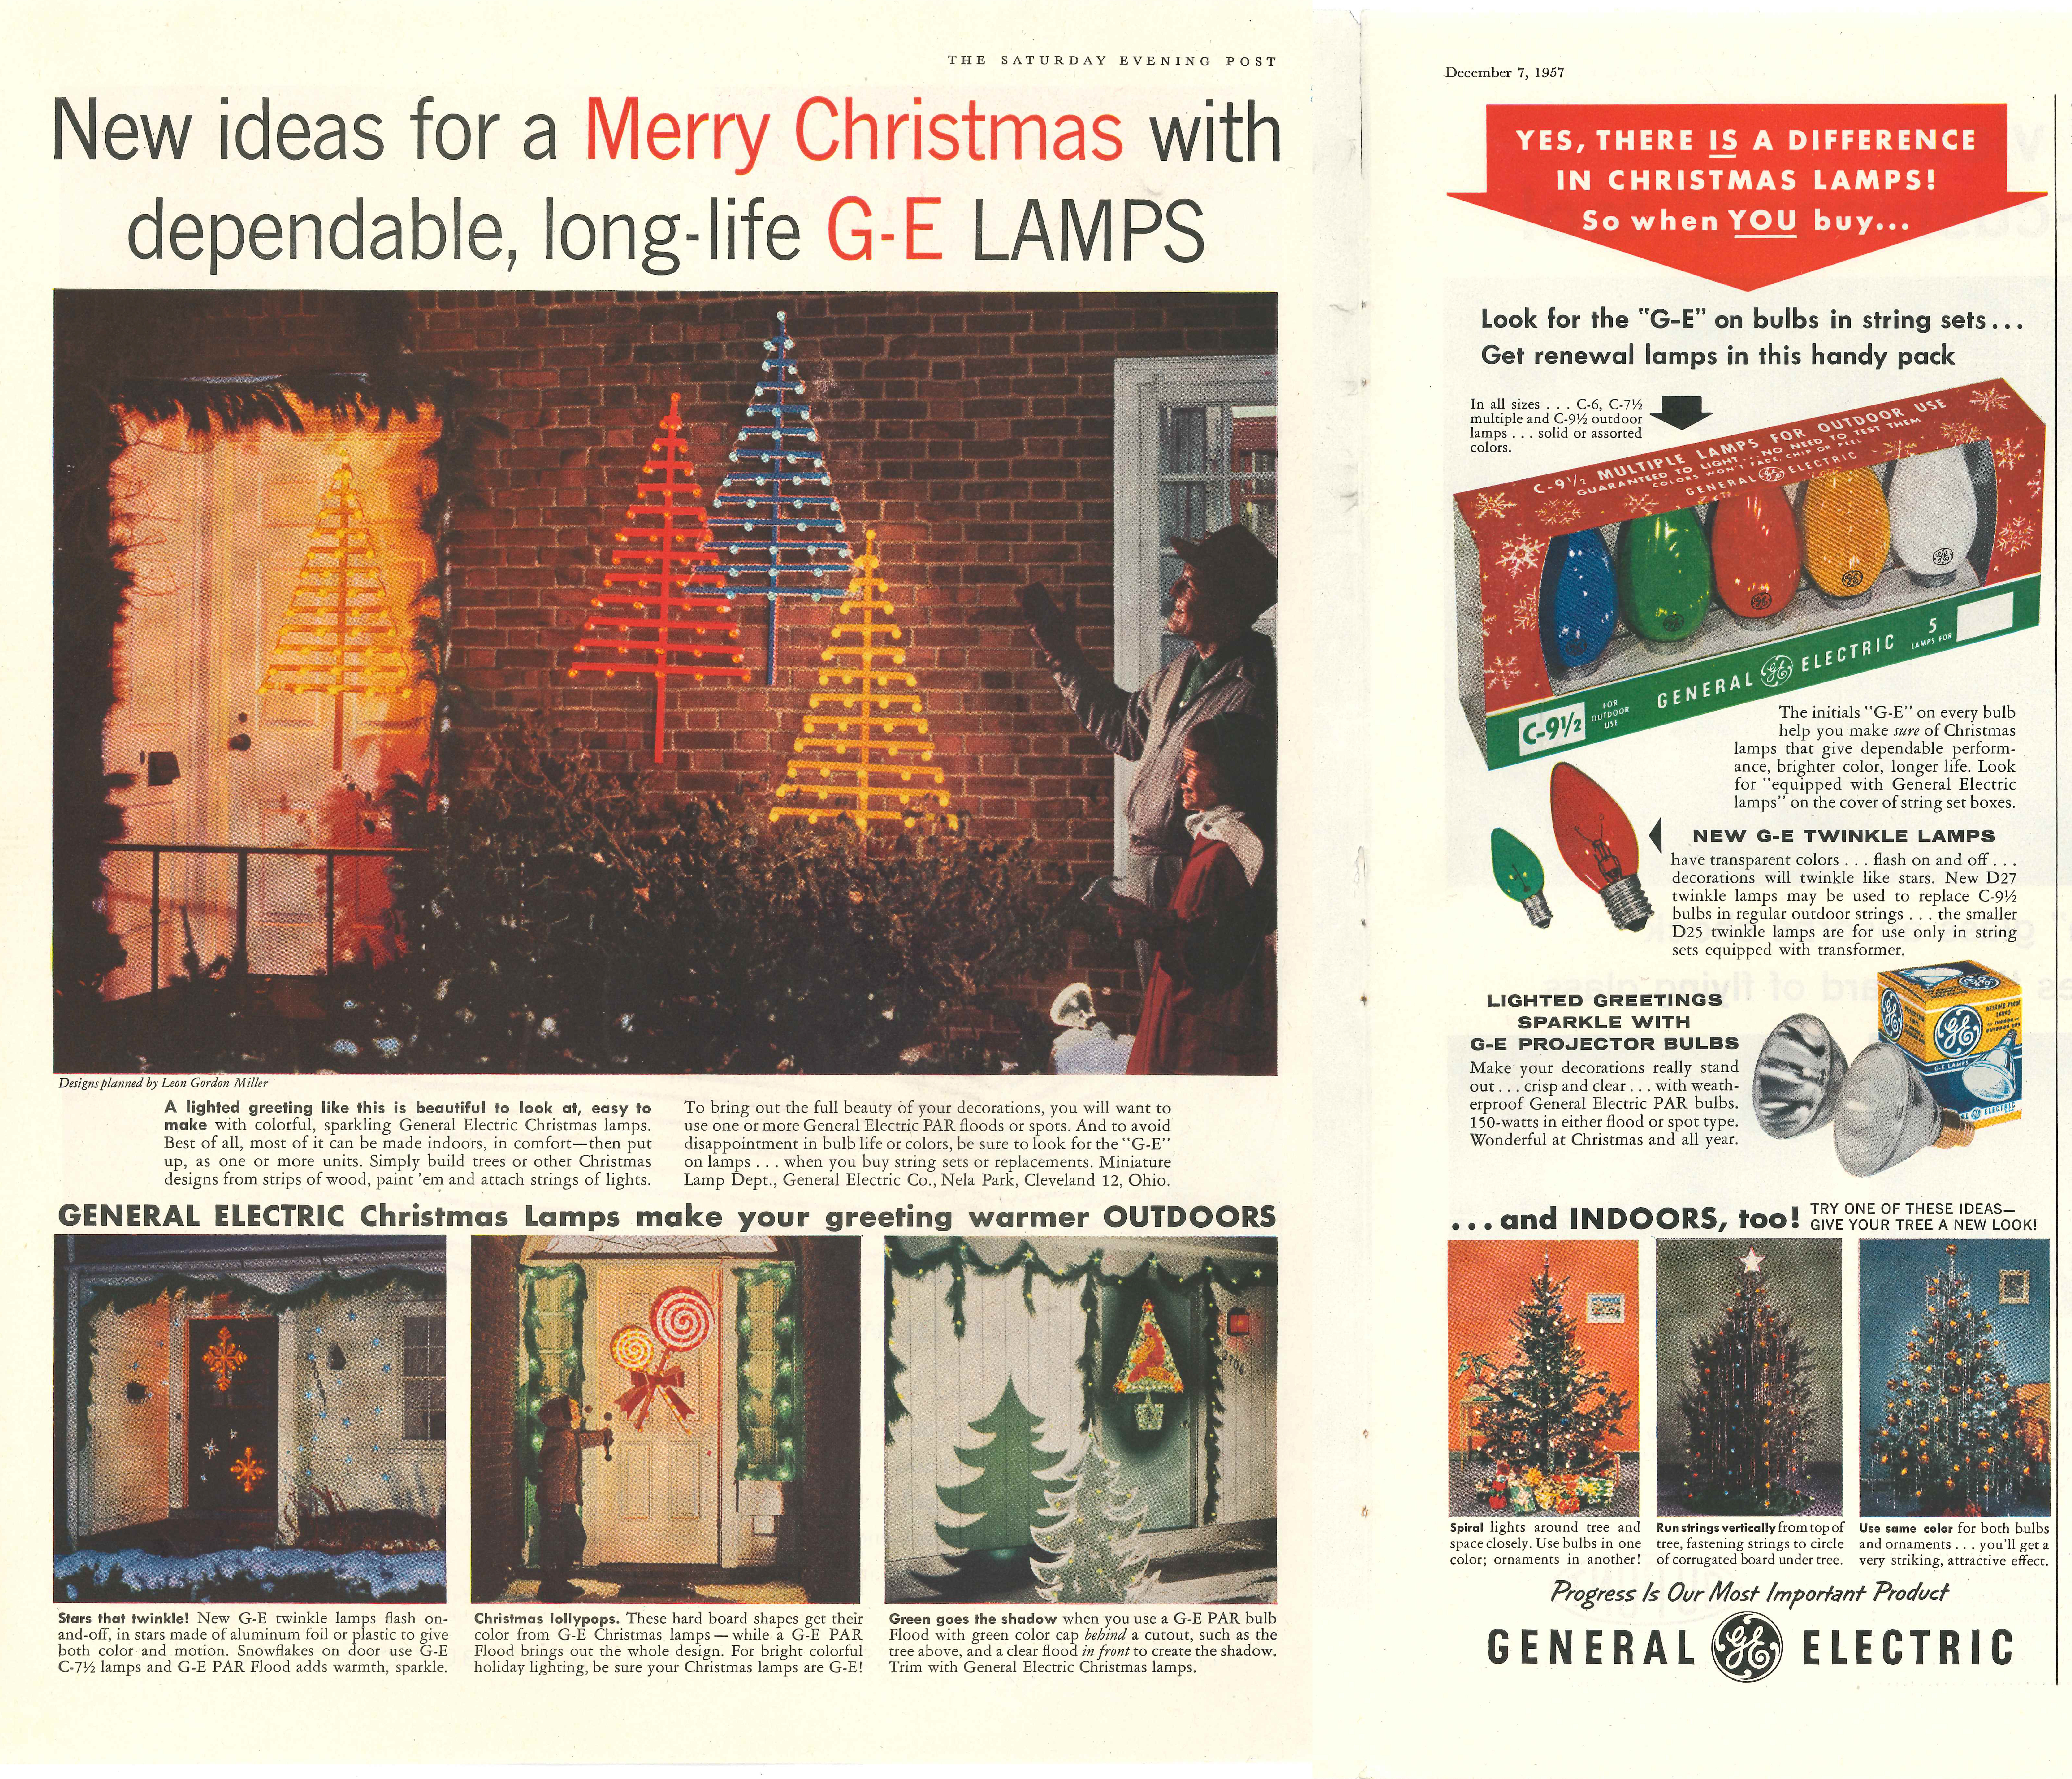 General Electric - published in The Saturday Evening Post - December 7, 1957